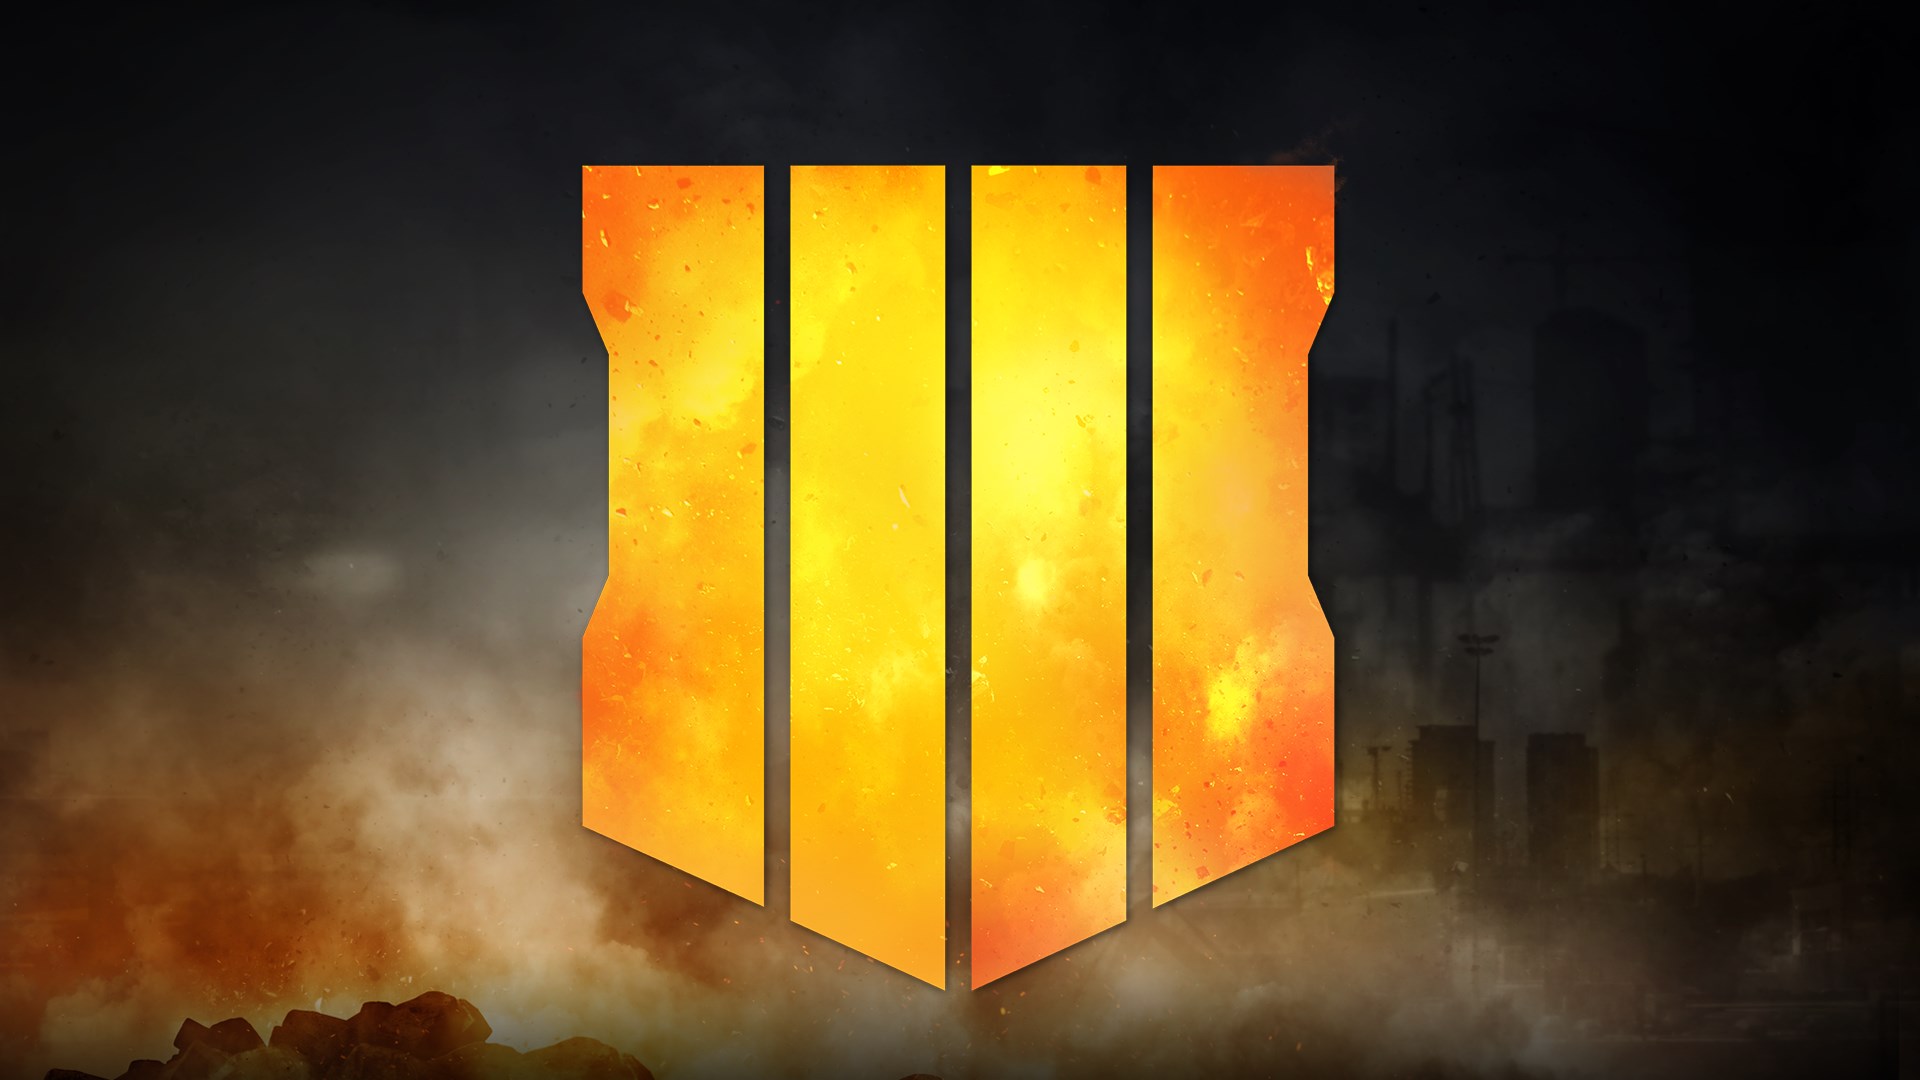 call of duty black ops 4 microsoft store